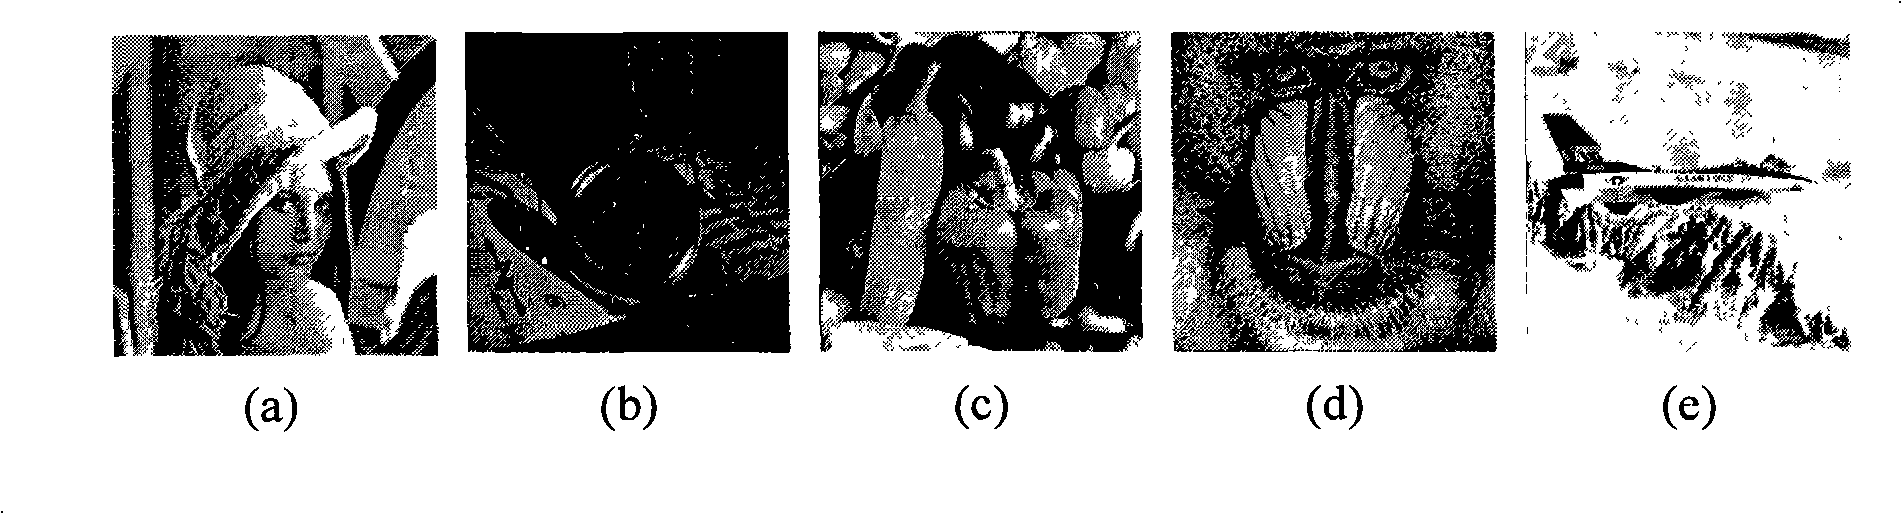 Robust image copy detection method base on content